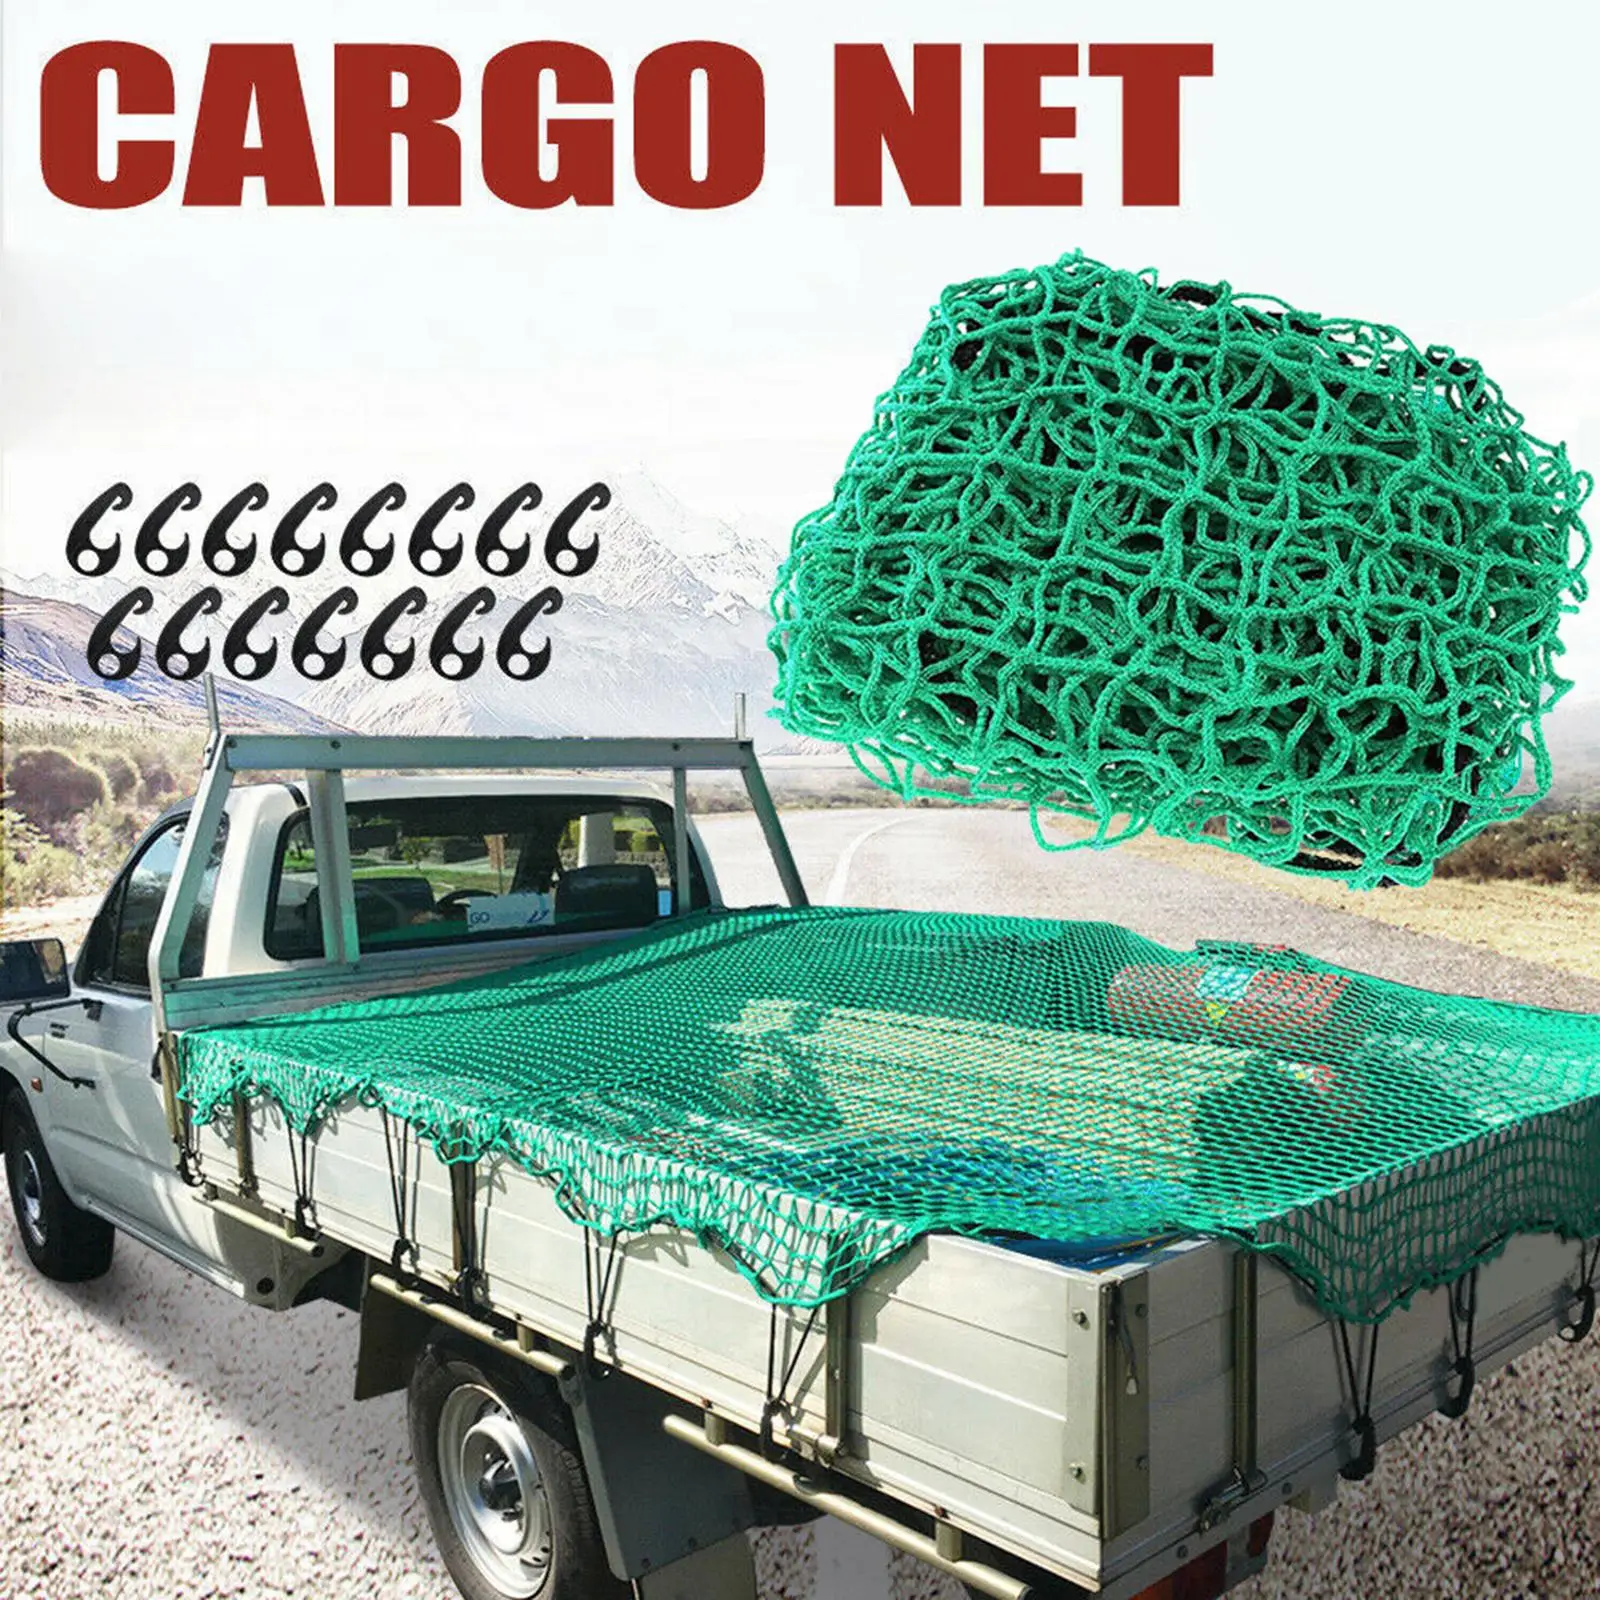 Premium Truck Bed Cargo Net 2.5M x 3.5M Small Mesh Holes Carabiners Pickup Cargo Net for Trailer Boat RV SUV Car